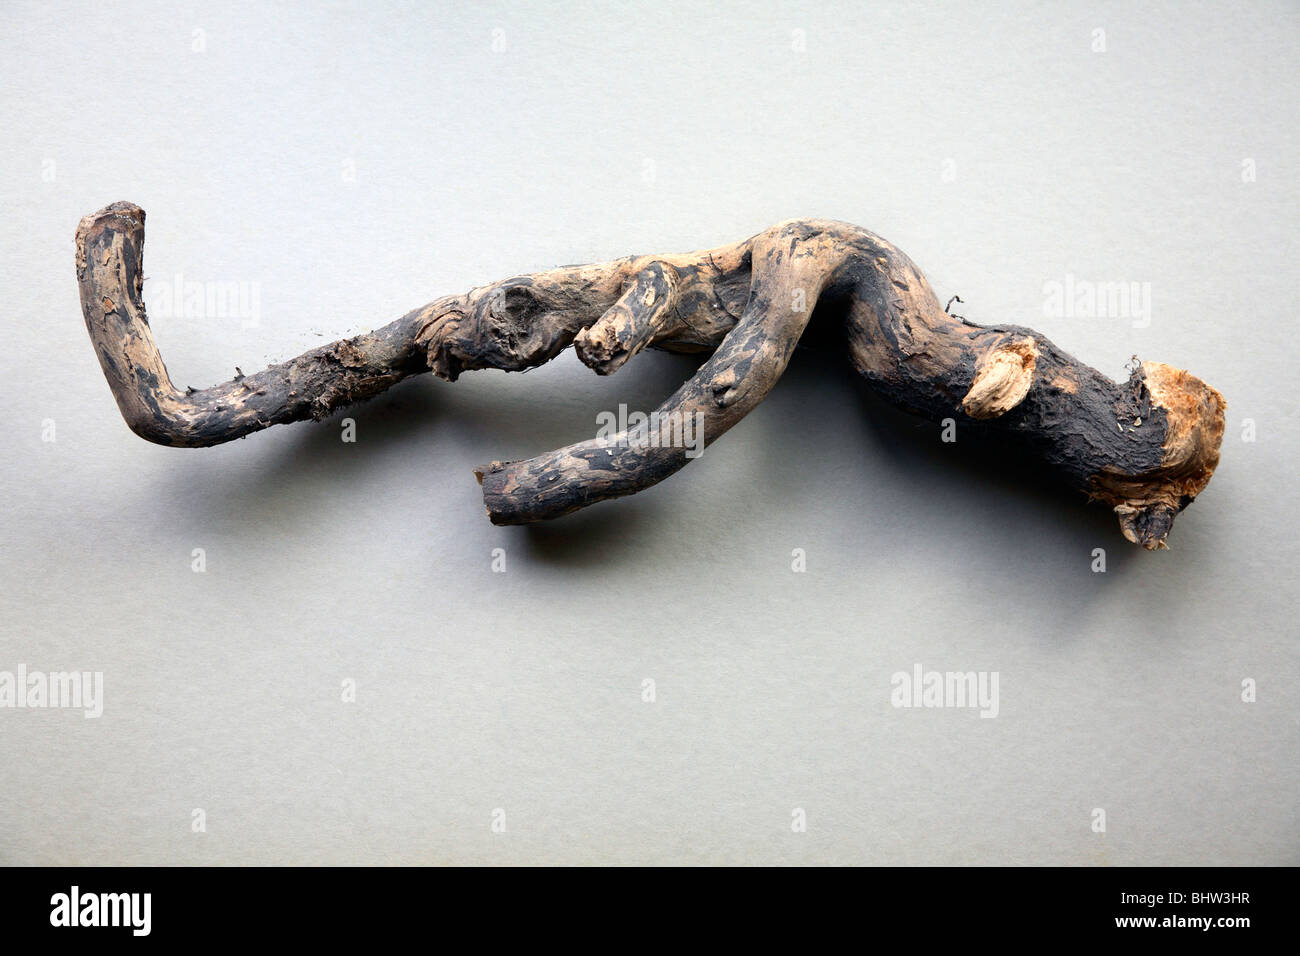 A gnarled old tree branch Stock Photo